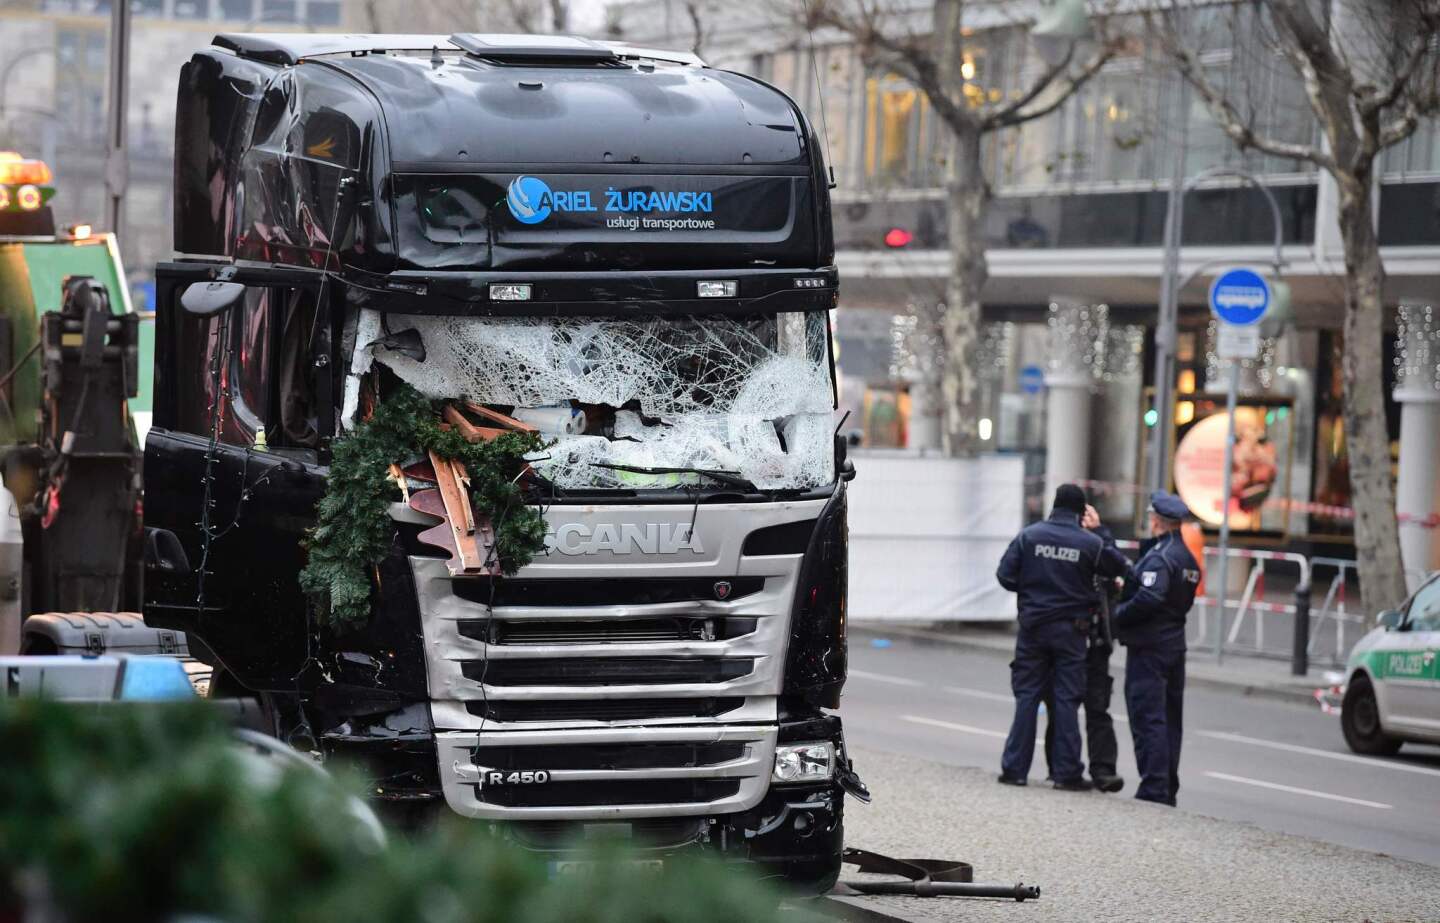 Berlin attack being called an act of terror